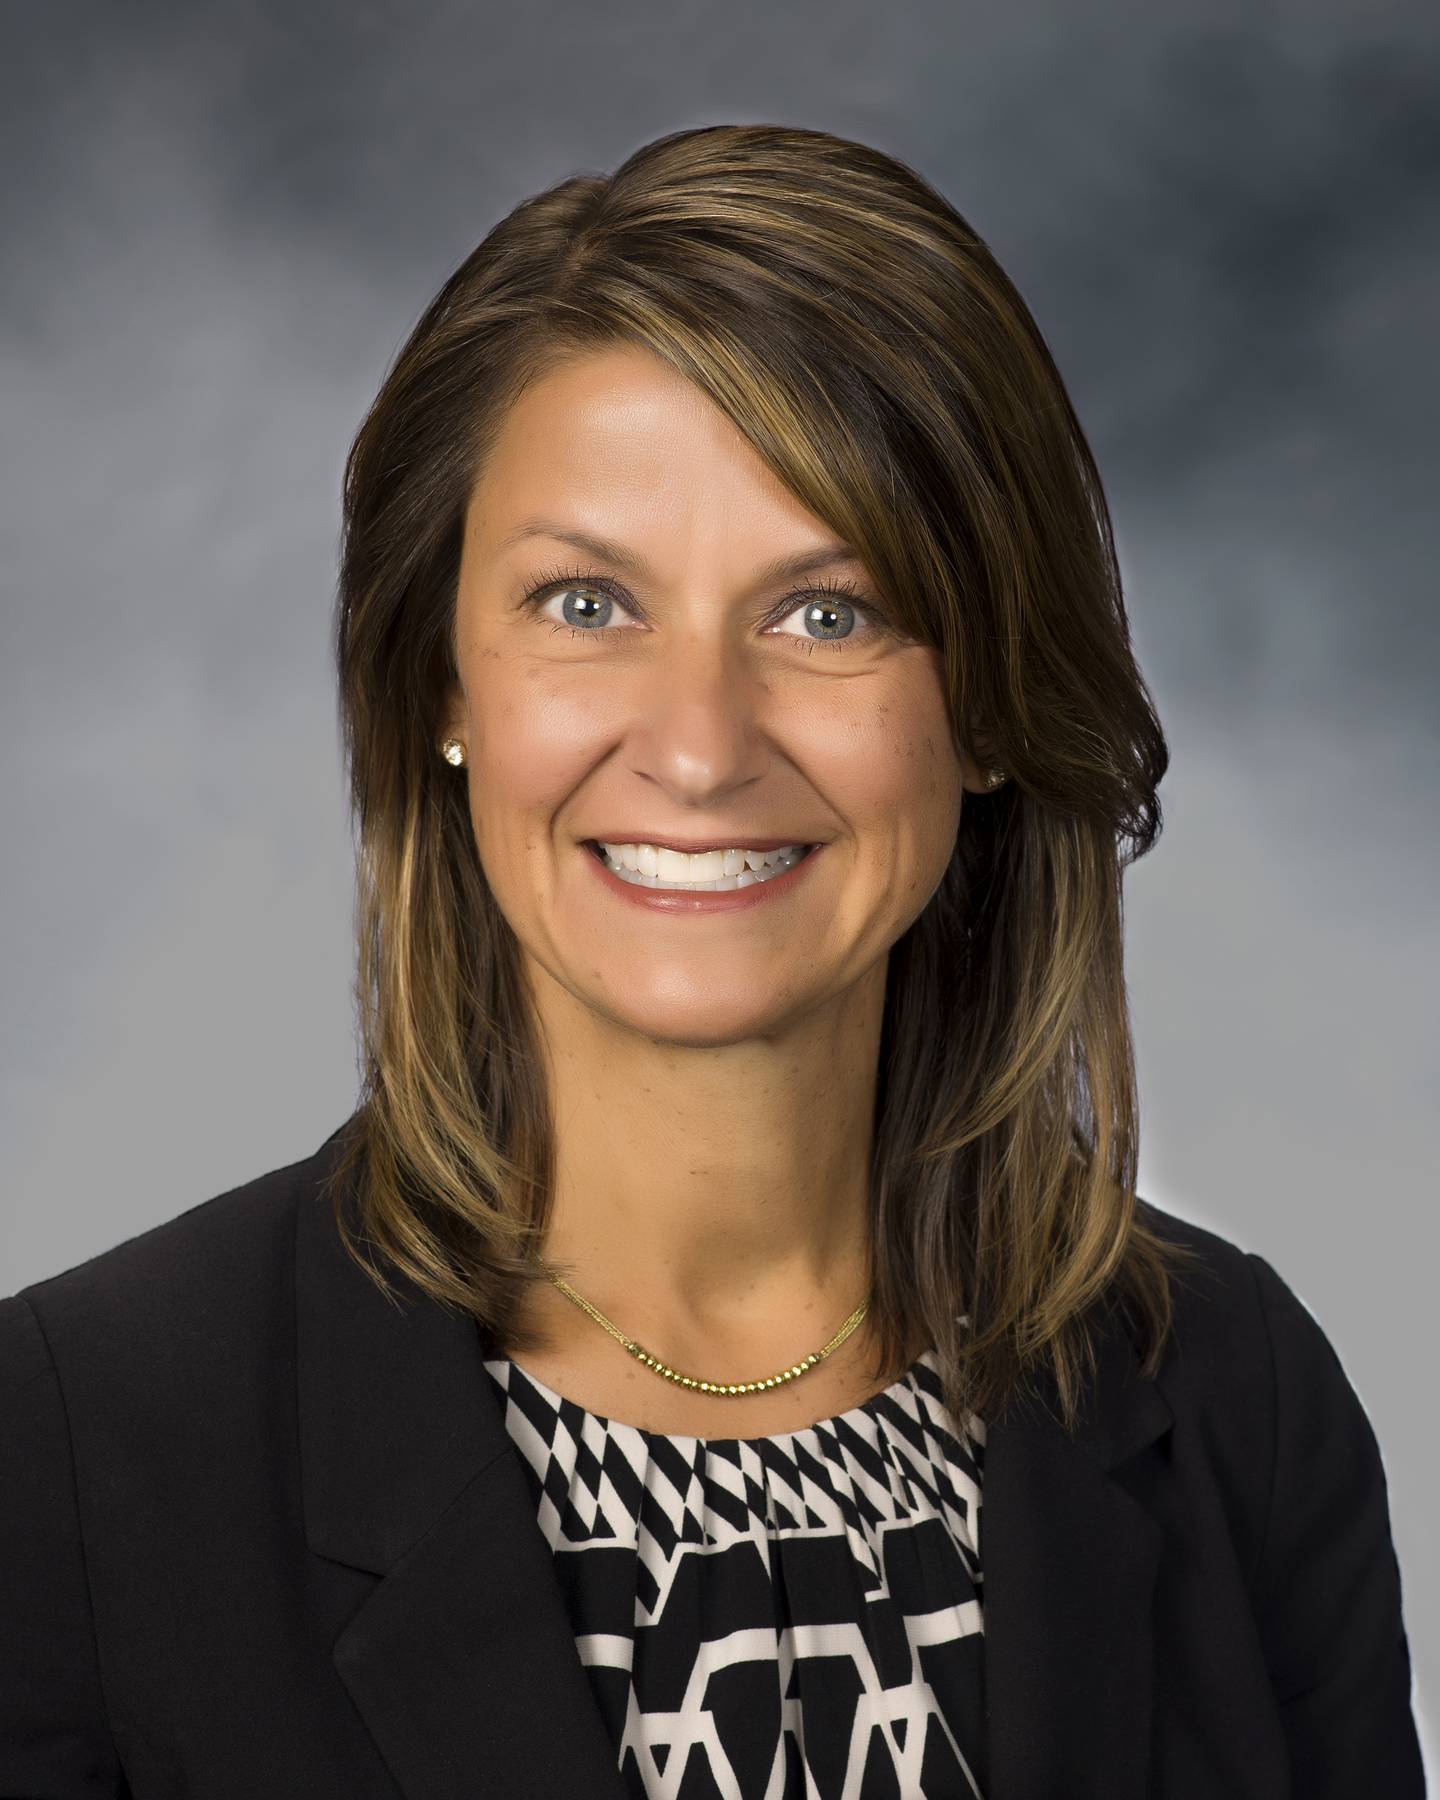 Lori R. Motsch is the superintendent at New Lenox School District 122.